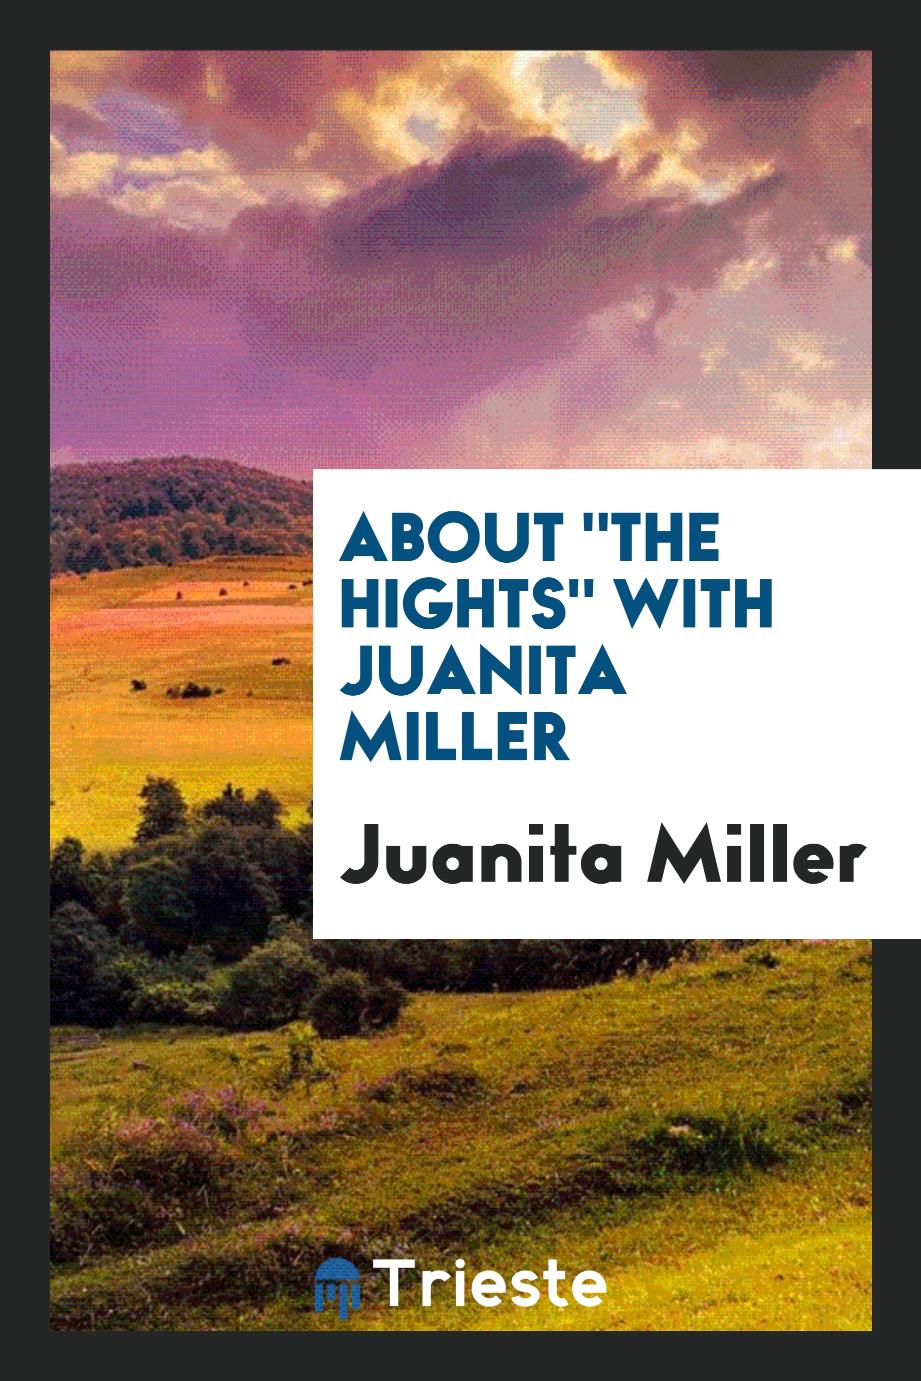 About "The Hights" with Juanita Miller